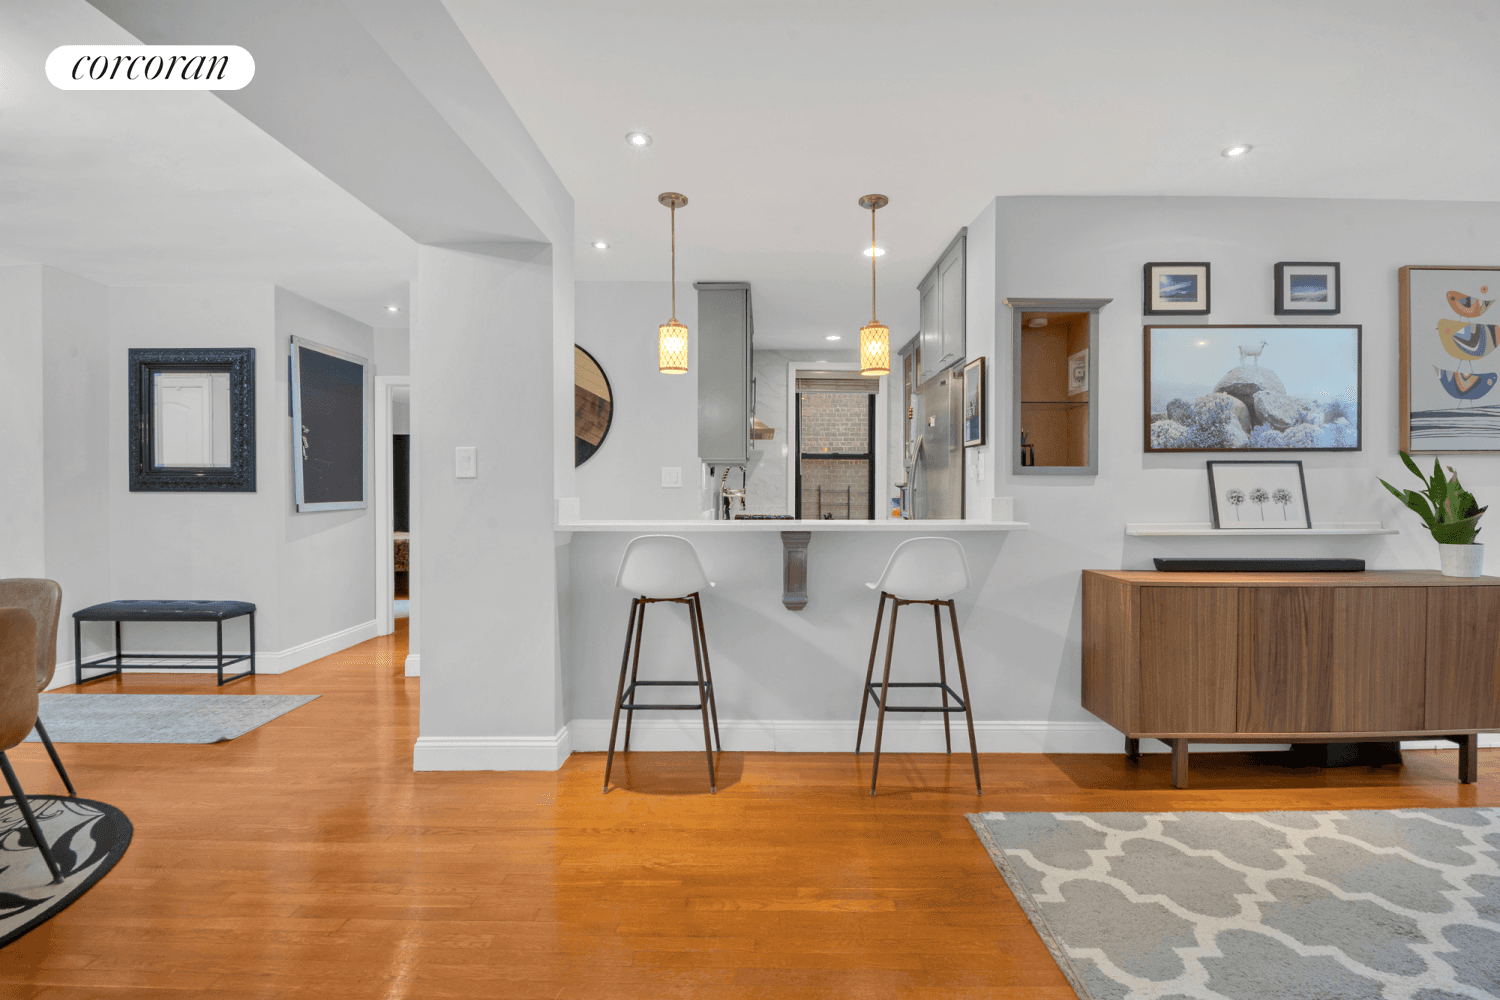 OH Saturday 9 16 by Appt only This exceptional 2BR home, located in the charming neighborhood of Park Terrace East in northern Manhattan, offers a wonderful alternative to the bustle ...